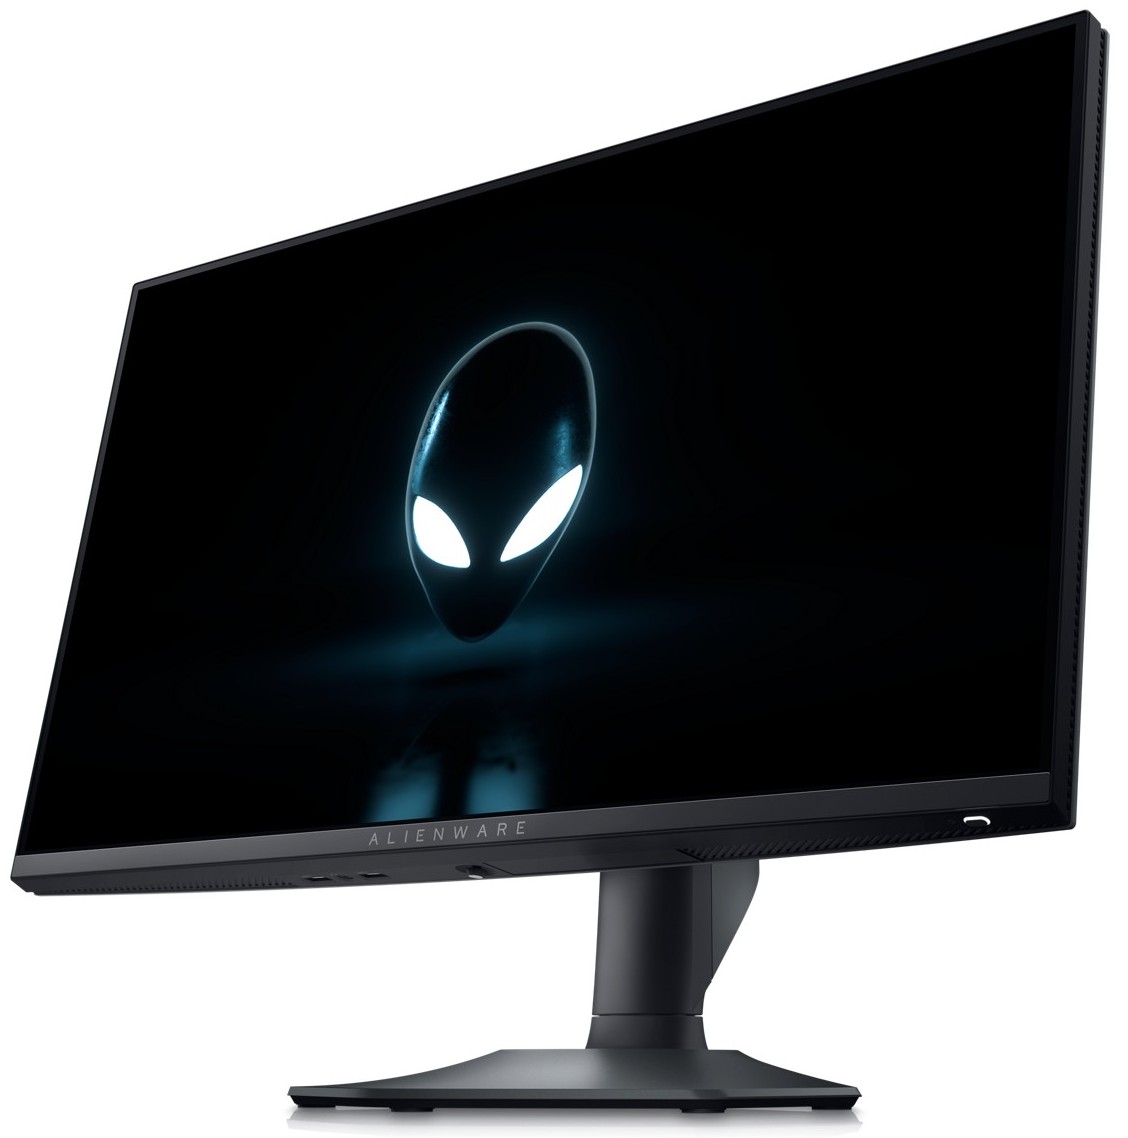 Dell Alienware AW2523HF: 24.5-inch IPS gaming monitor announced 